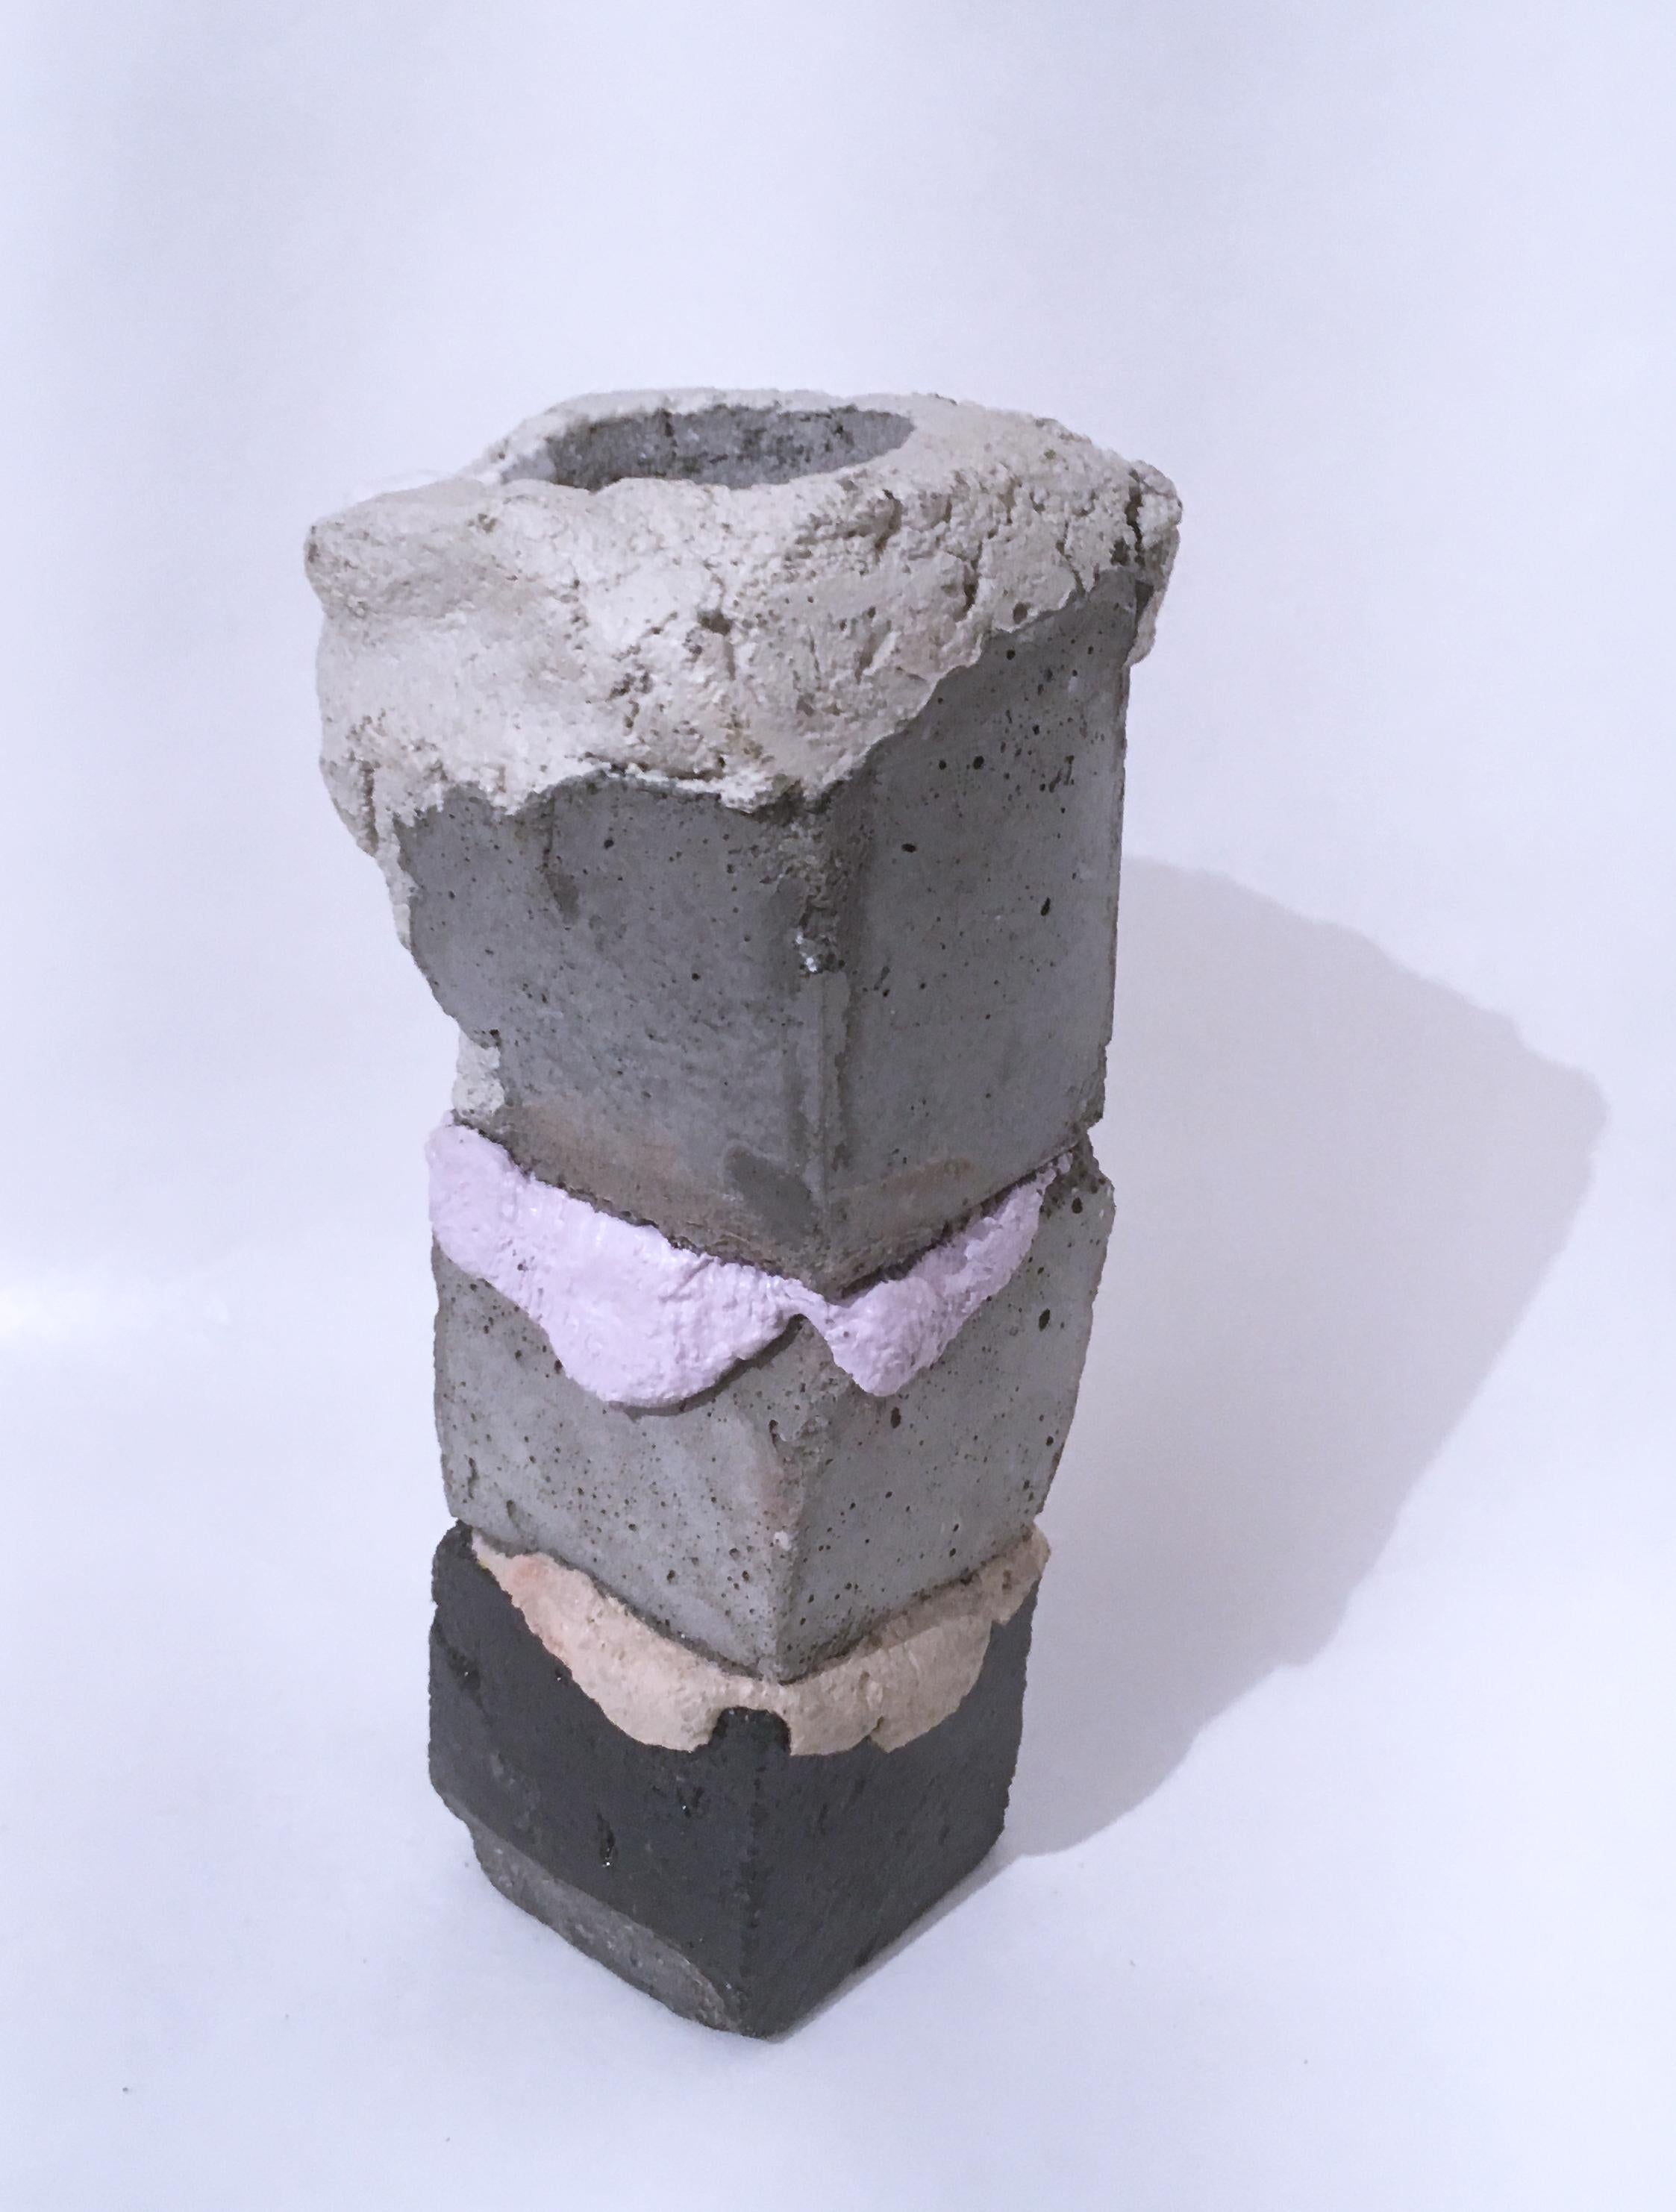 Biomorphic yet industrial style to Dena Paige Fischer's sculptural votive candle holder.  The stacked cubes are painted and smooth, piled upon one another into a column, or as the artist calls it, a totem.  The pastel pigmented concrete in peach and